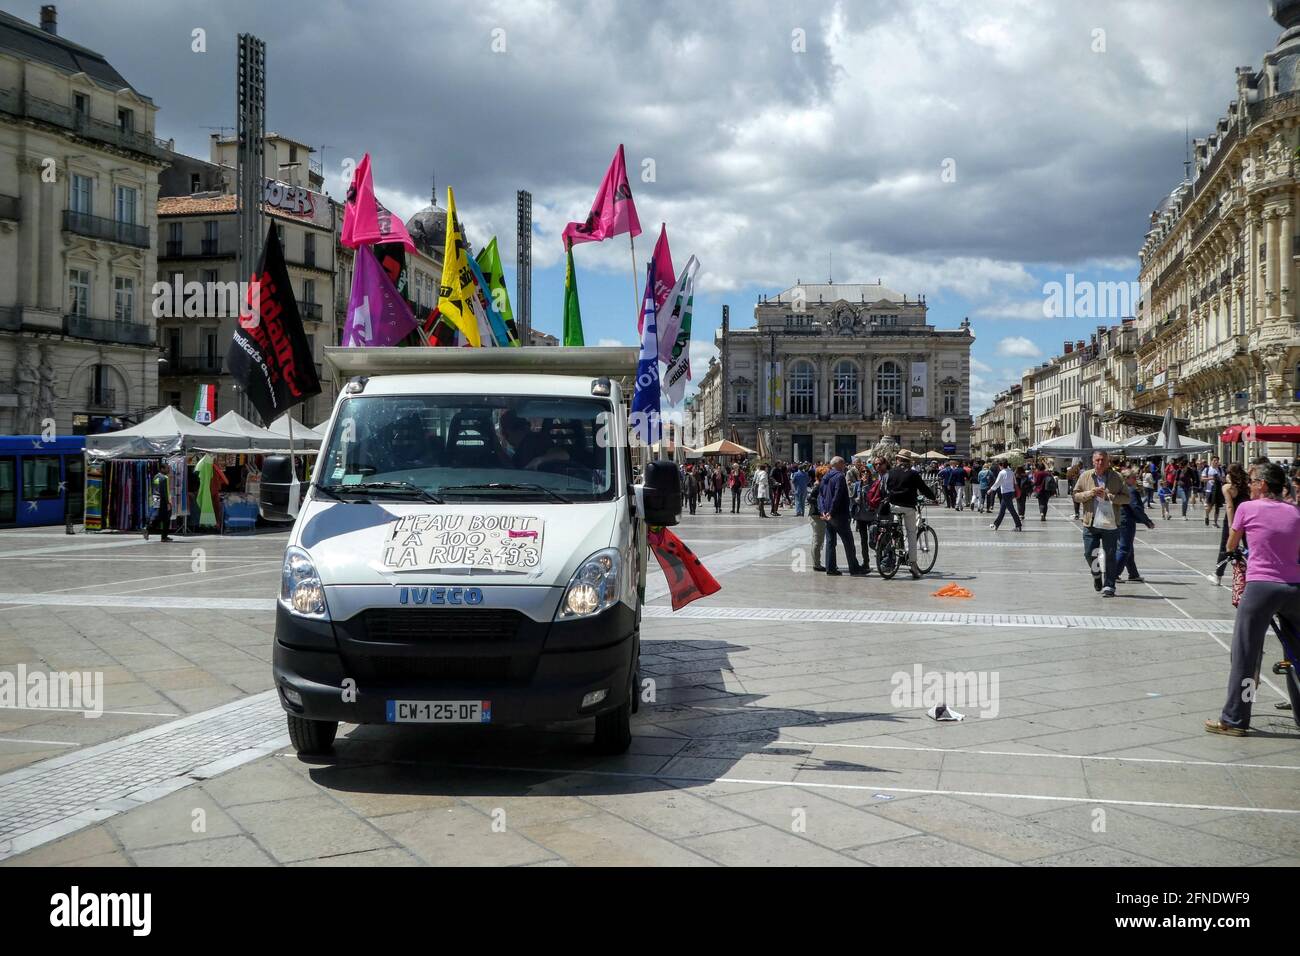 Union truck rallying people on Comedy Plaza, downtown Montpellier, Occitanie, South of France Stock Photo